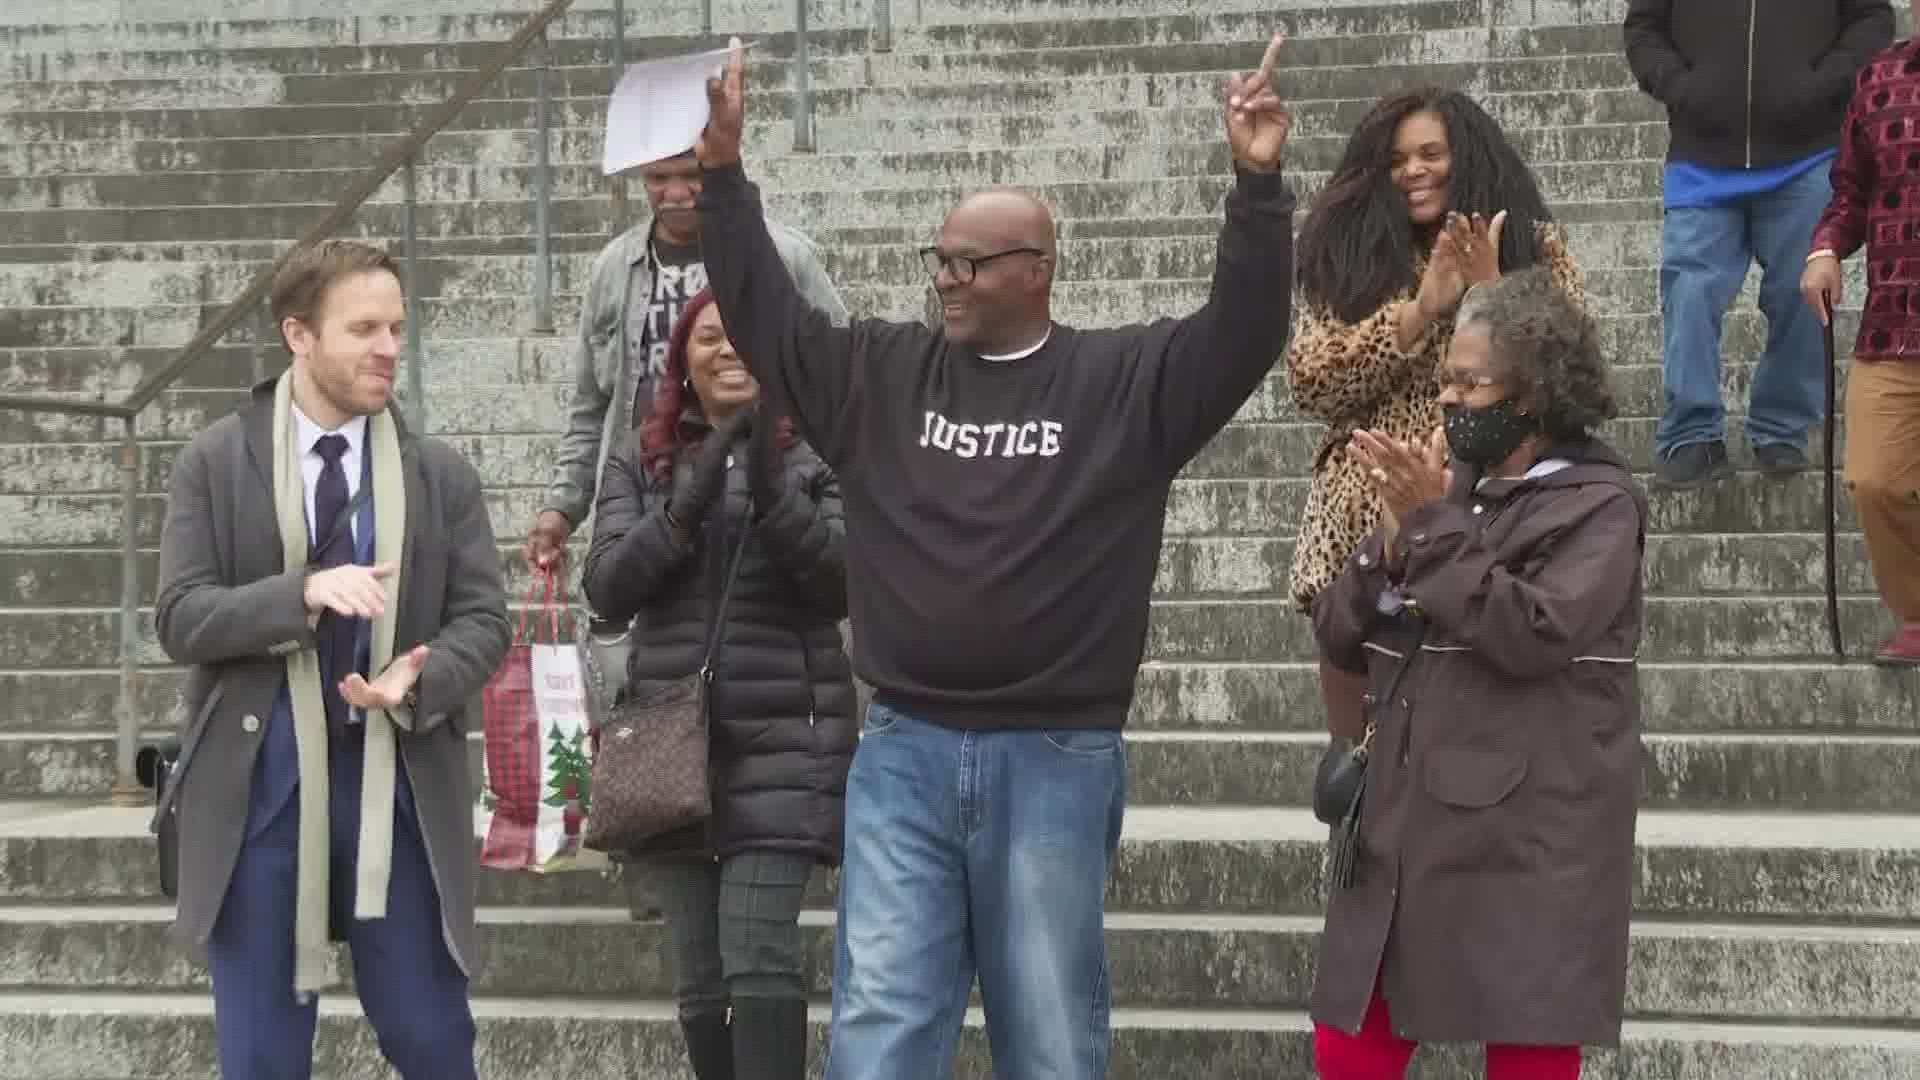 Man released from prison after conviction overturned in 1983 New Orleans murder case.